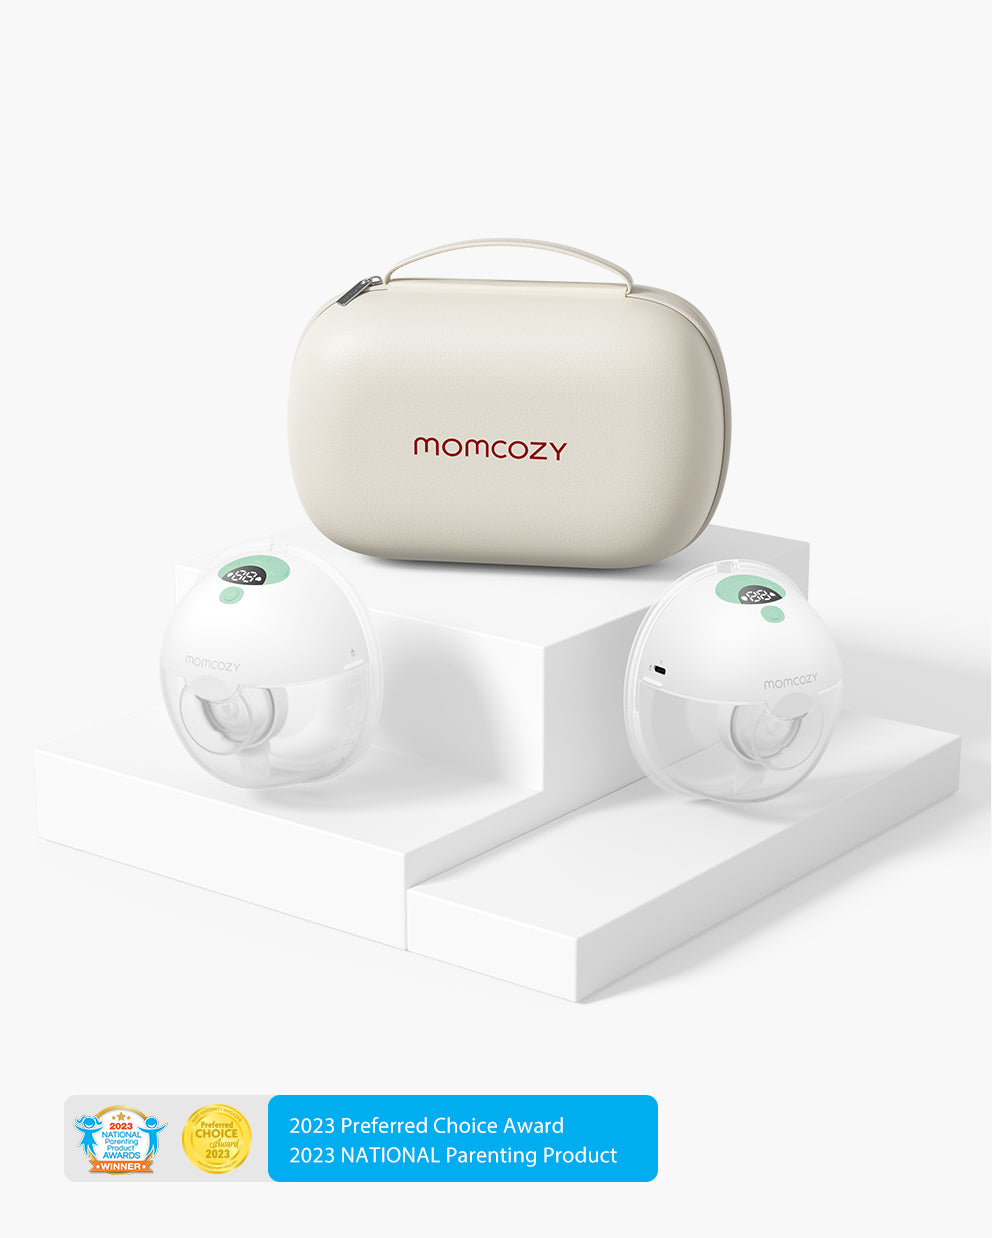 Momcozy Introduces the Revolutionary M5 All-in-one Hands-free